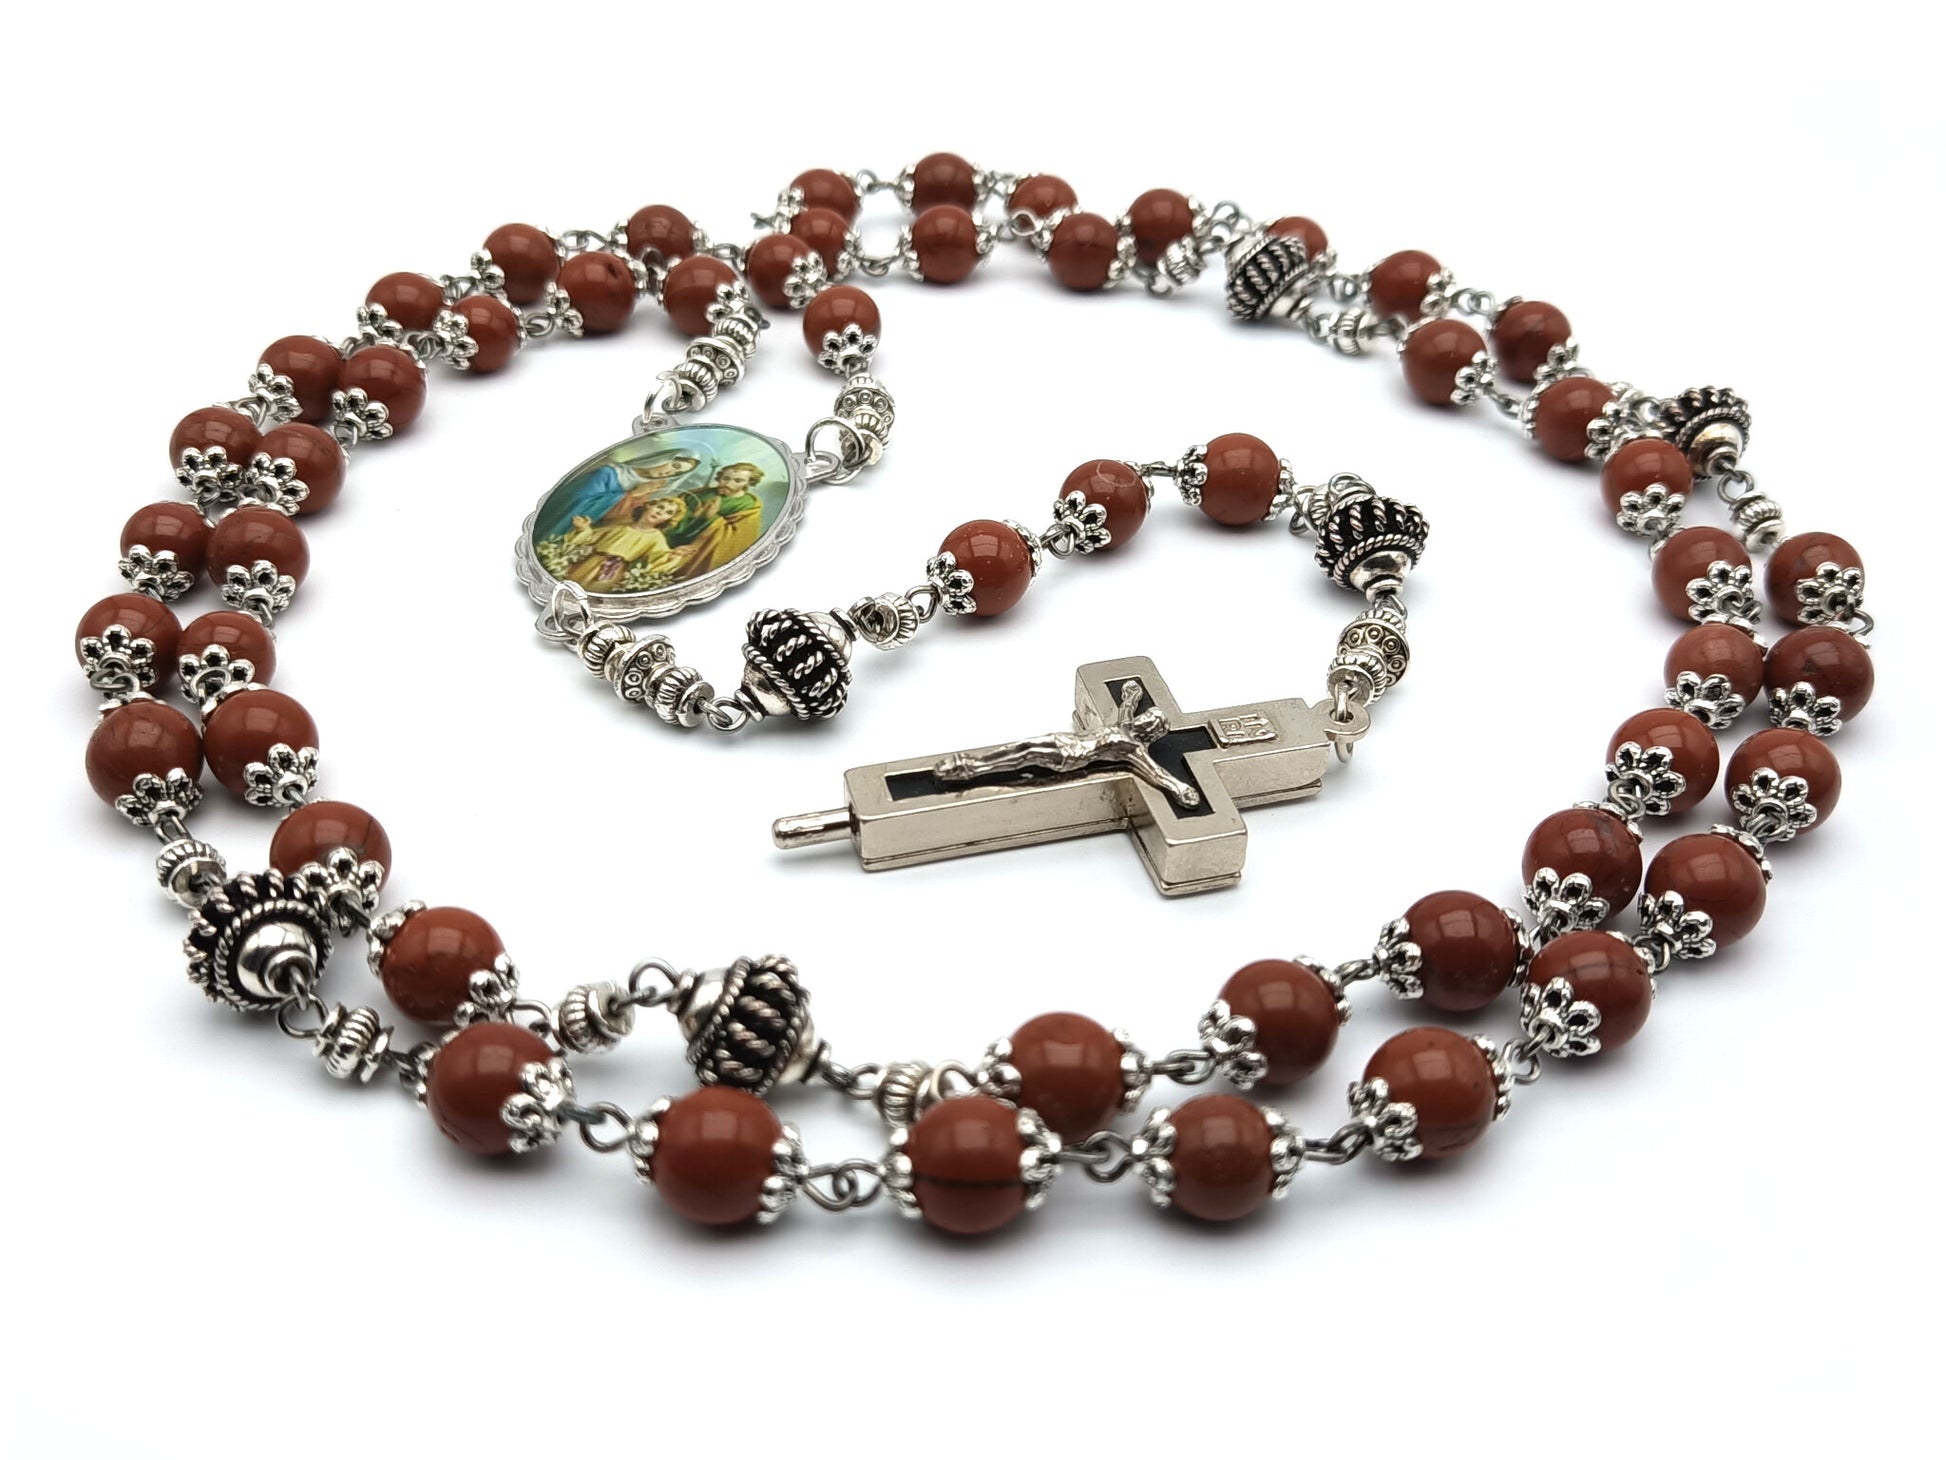 Holy Family unique rosary beads with brown gemstone beads, reliquary crucifix, silver pater beads, and picture centre medal. 